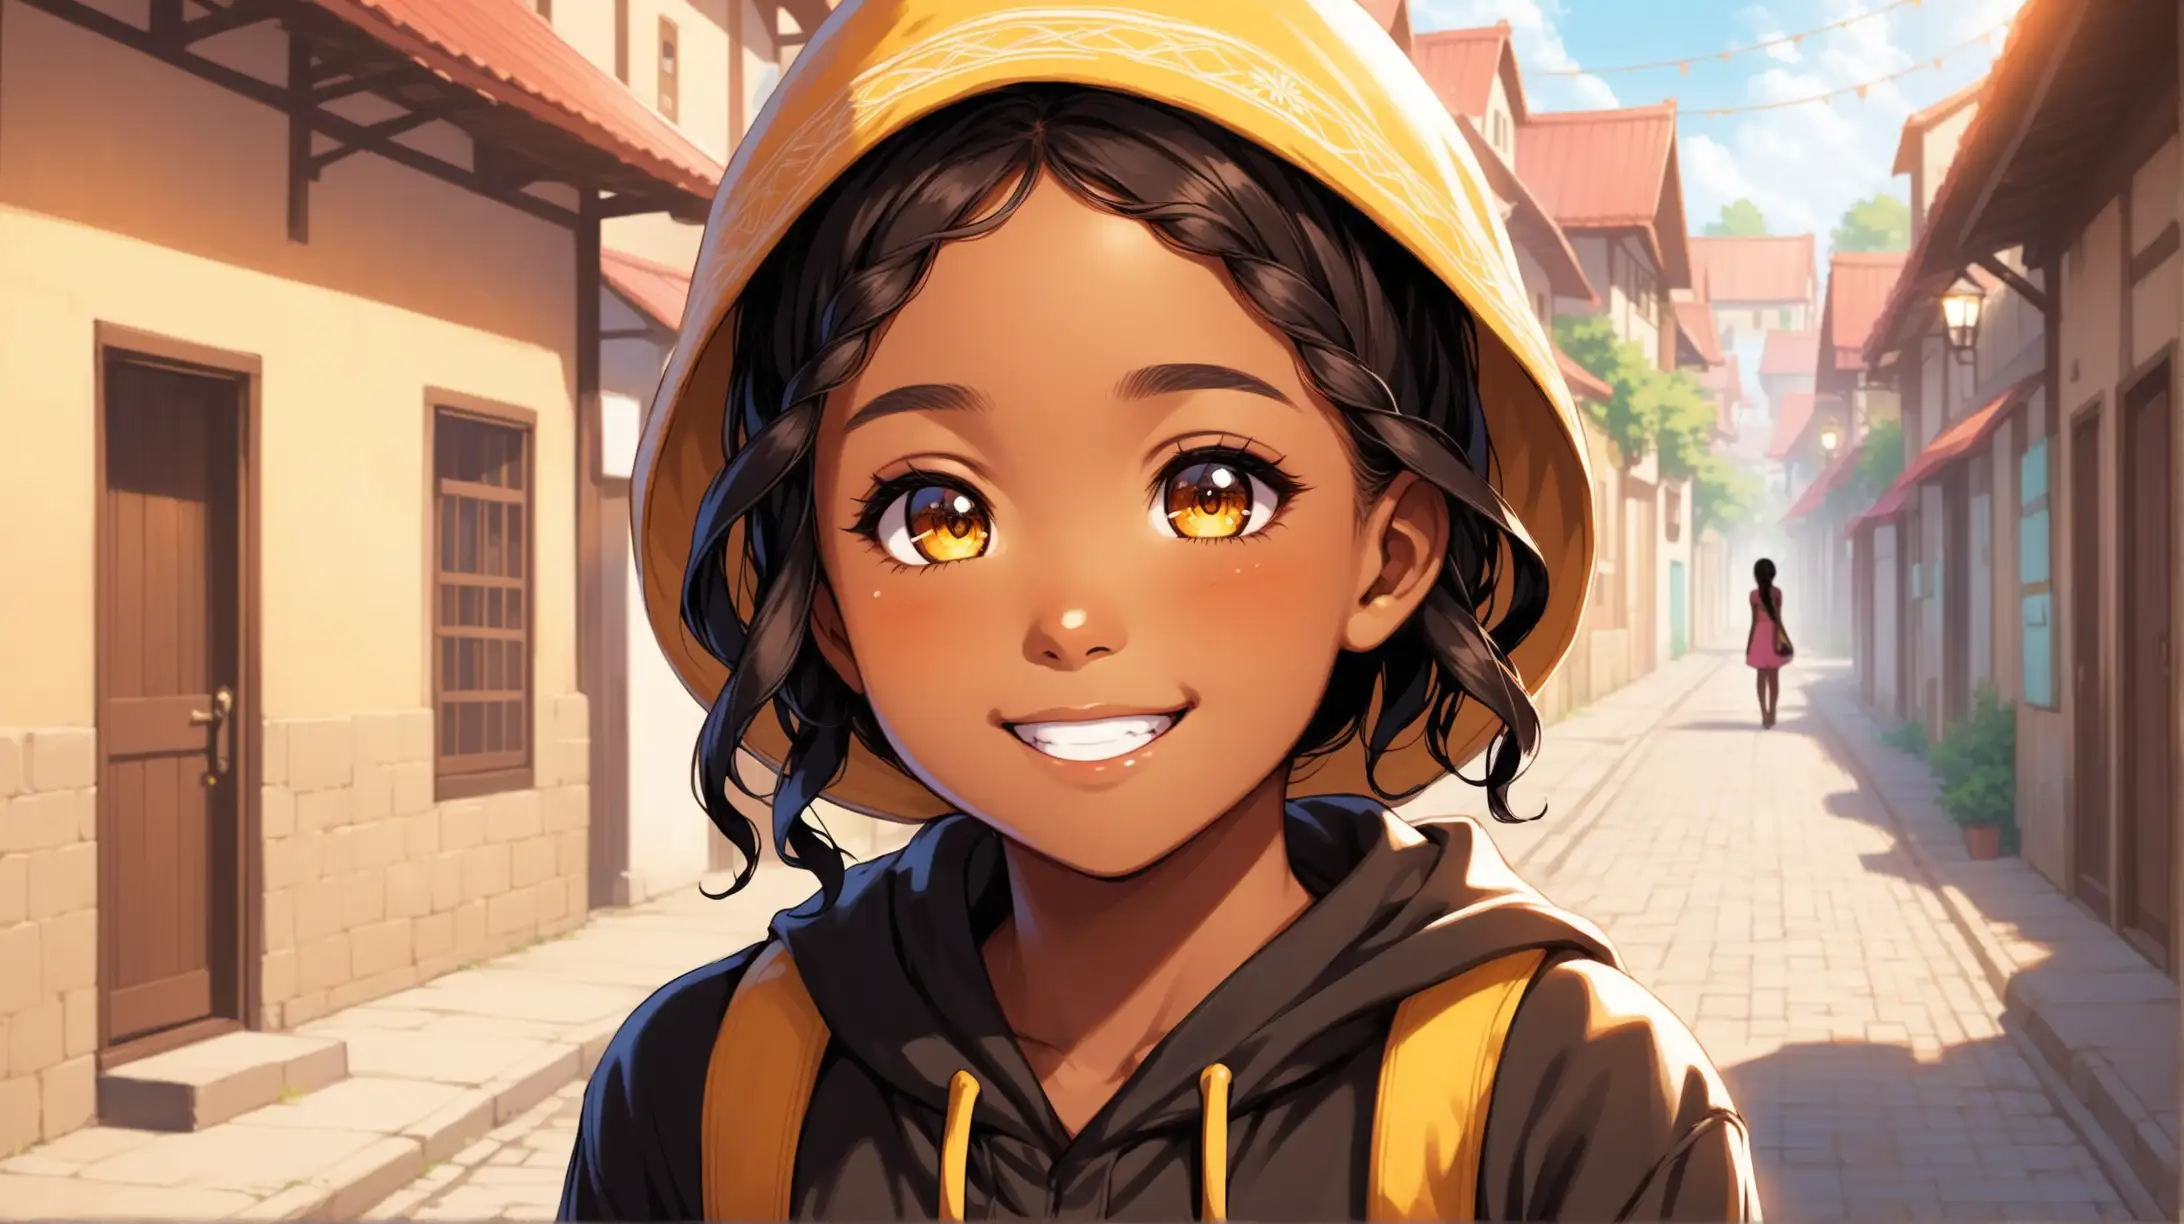 Lily a cheerful light skin ebony young girl with a spark of kindness in her eyes, skipped through the town. we see her greeted each person she passed with a warm smile and a friendly hello